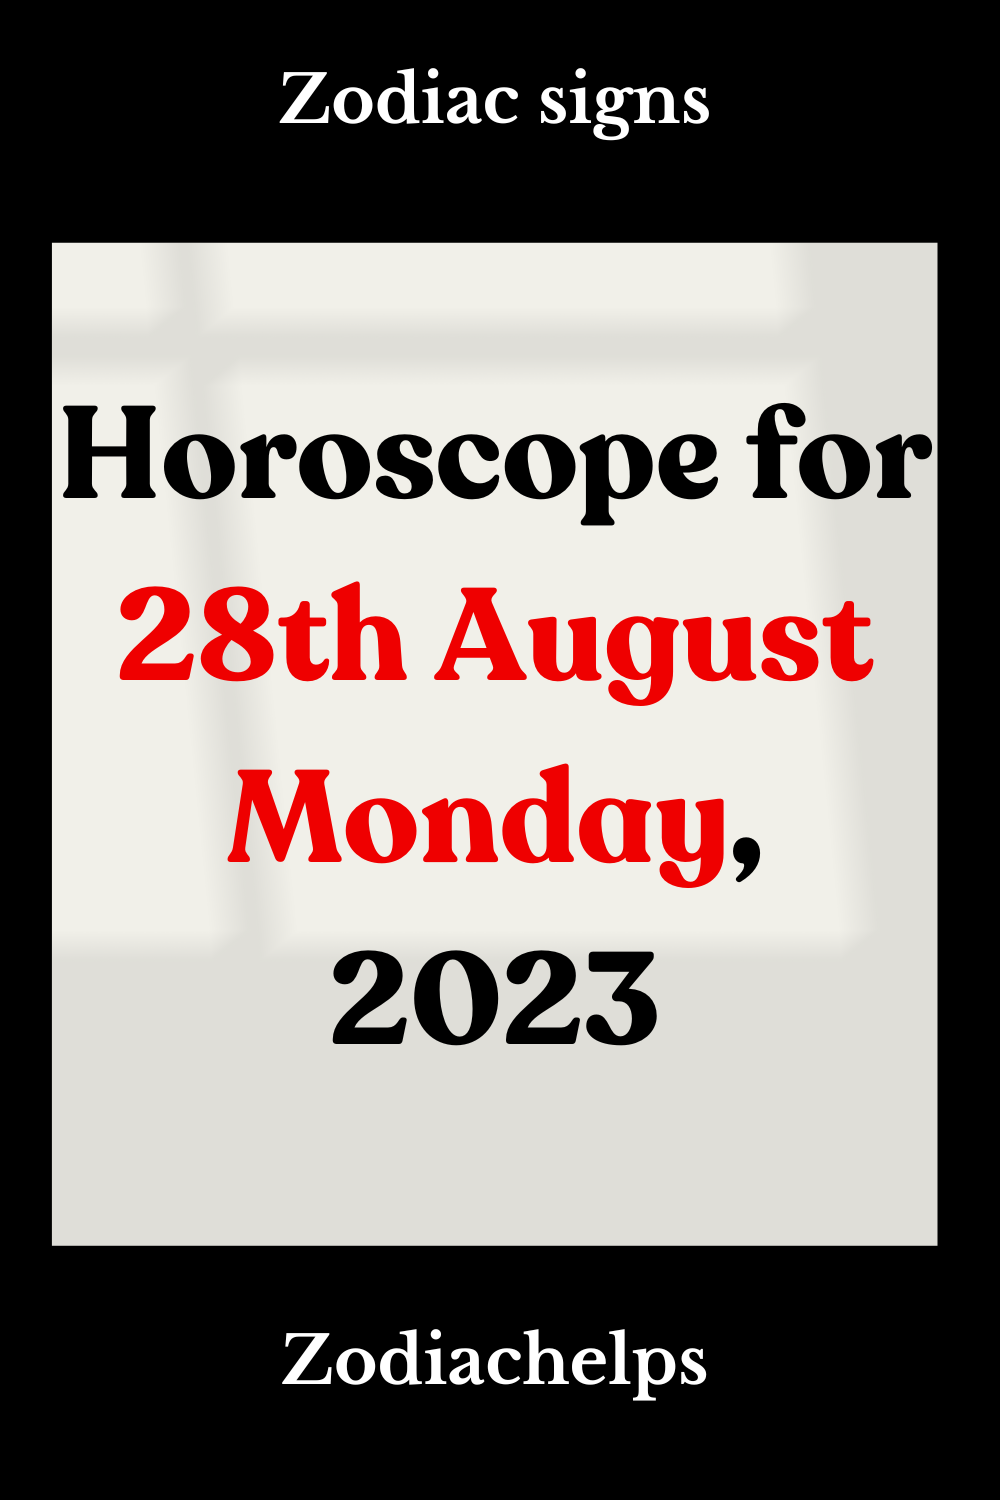 Horoscope for 28th August Monday, 2023